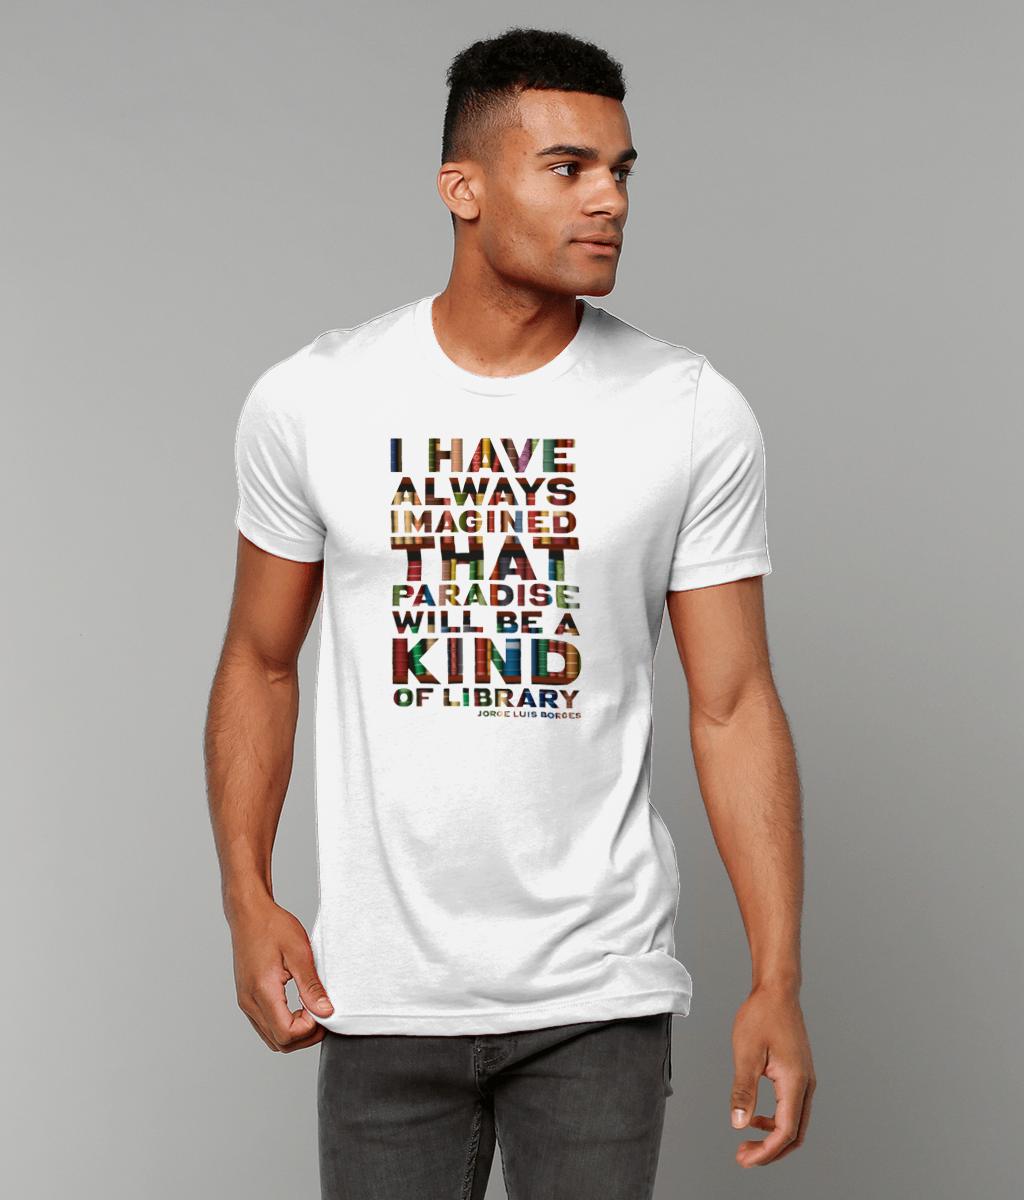 Canvas Unisex Crew Neck T-Shirt Paradise "I have always imagined that paradise will be a kind of library."